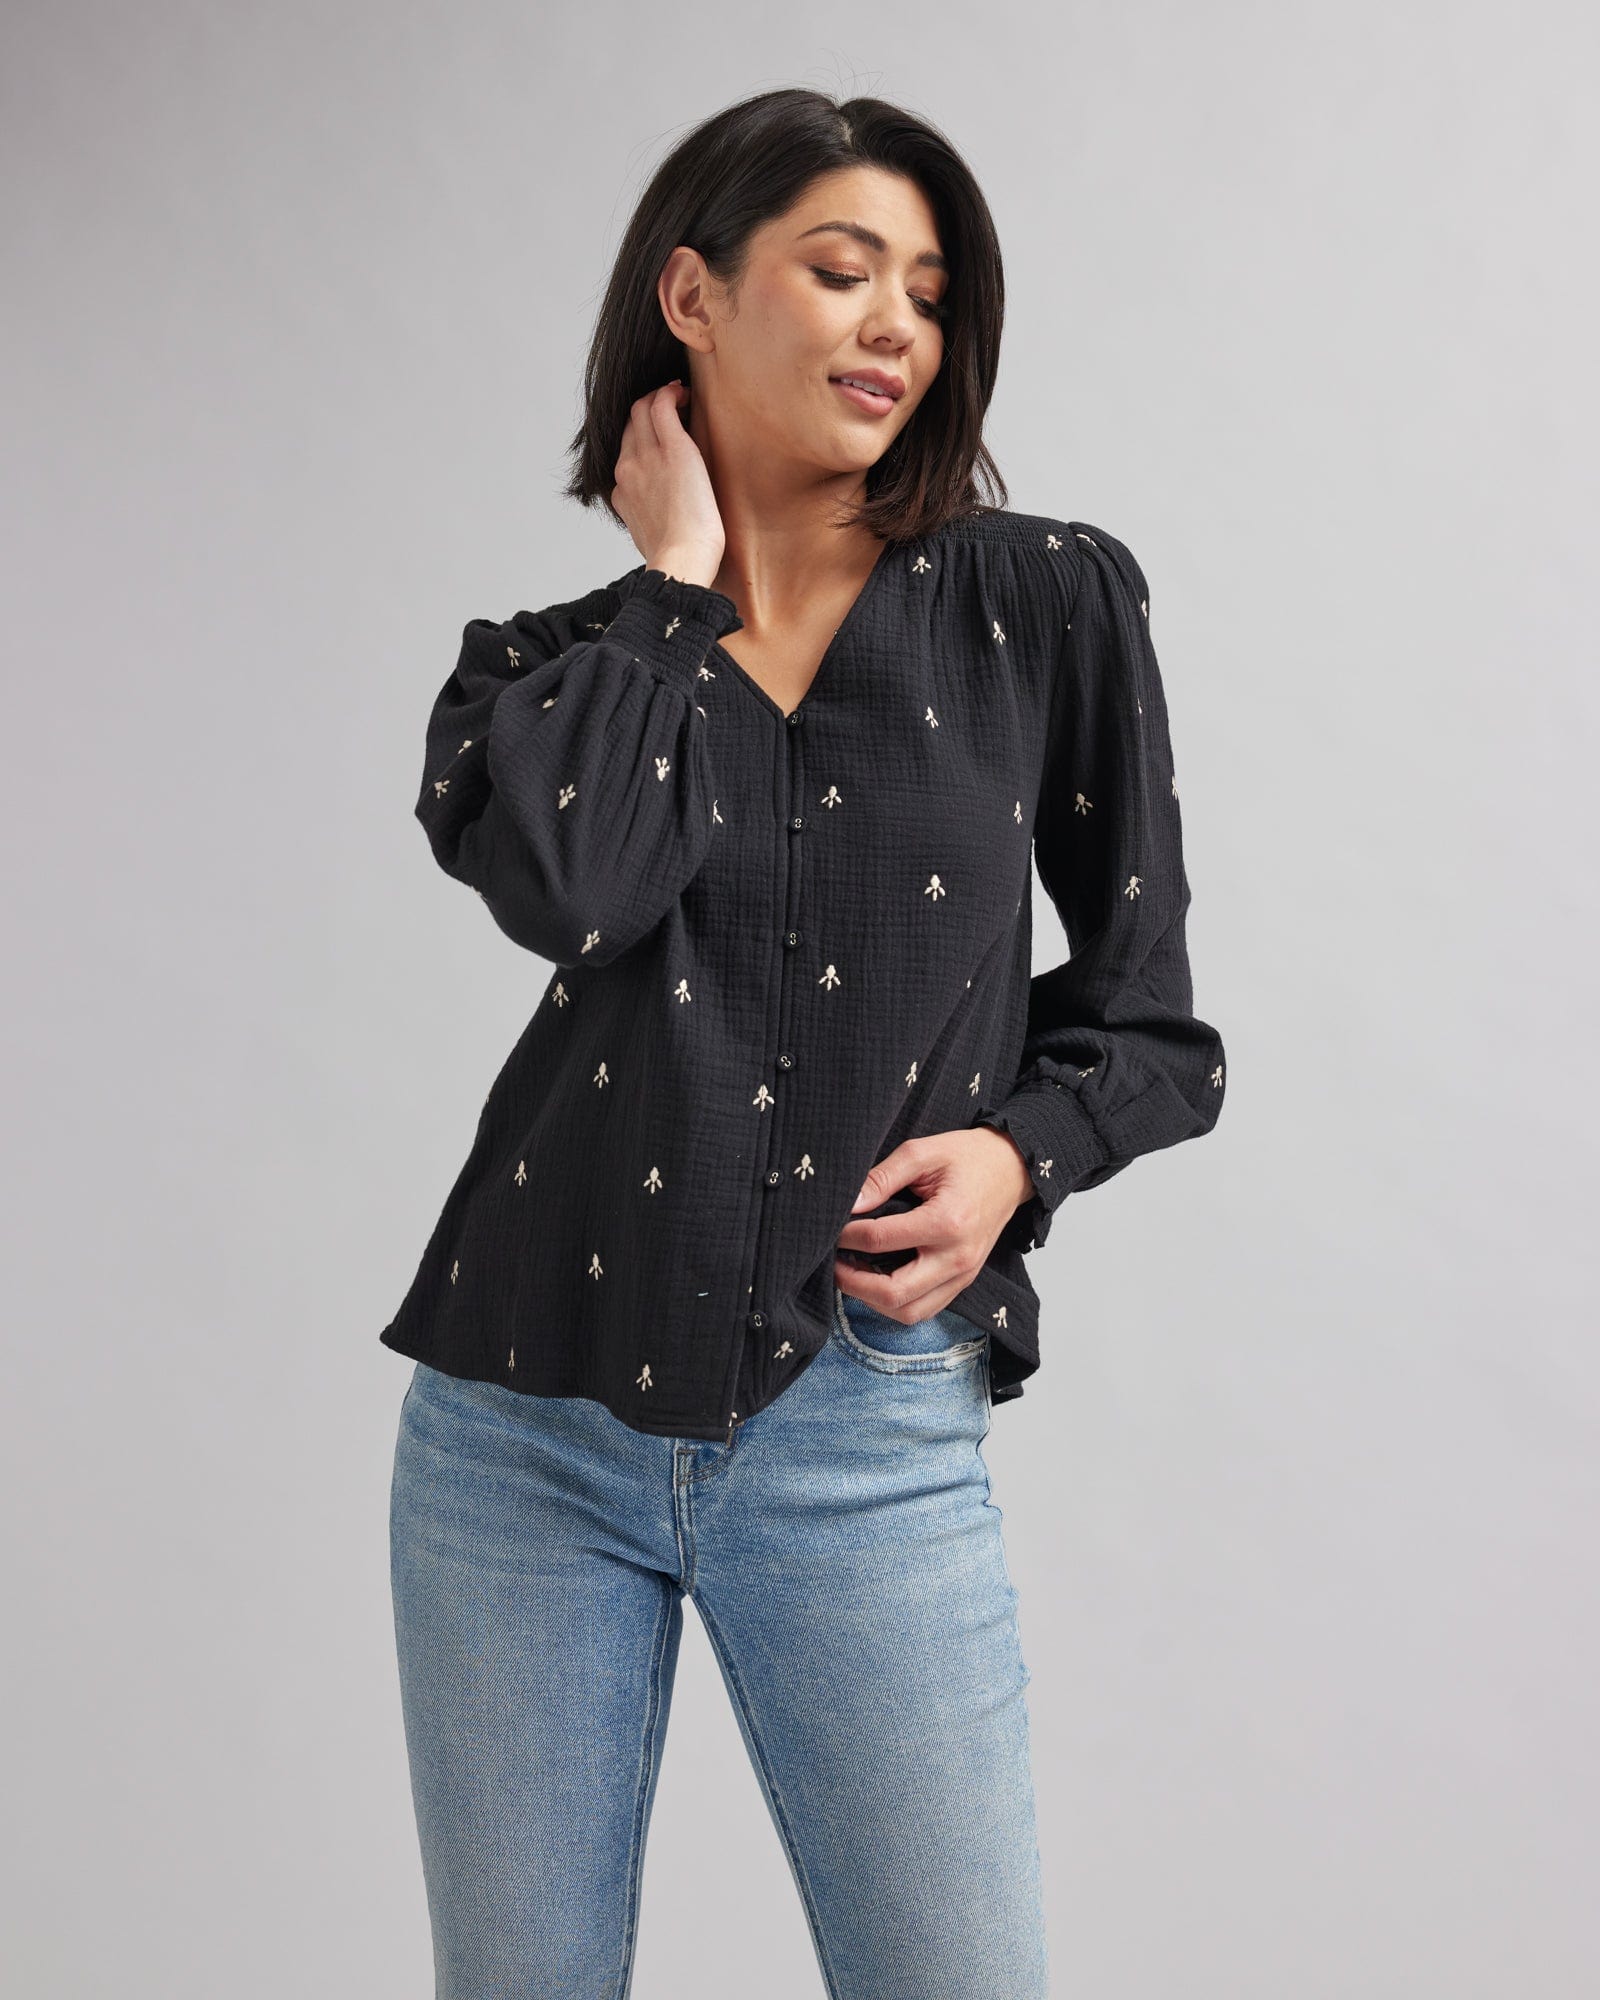 Woman in a long sleeve black with white accent blouse